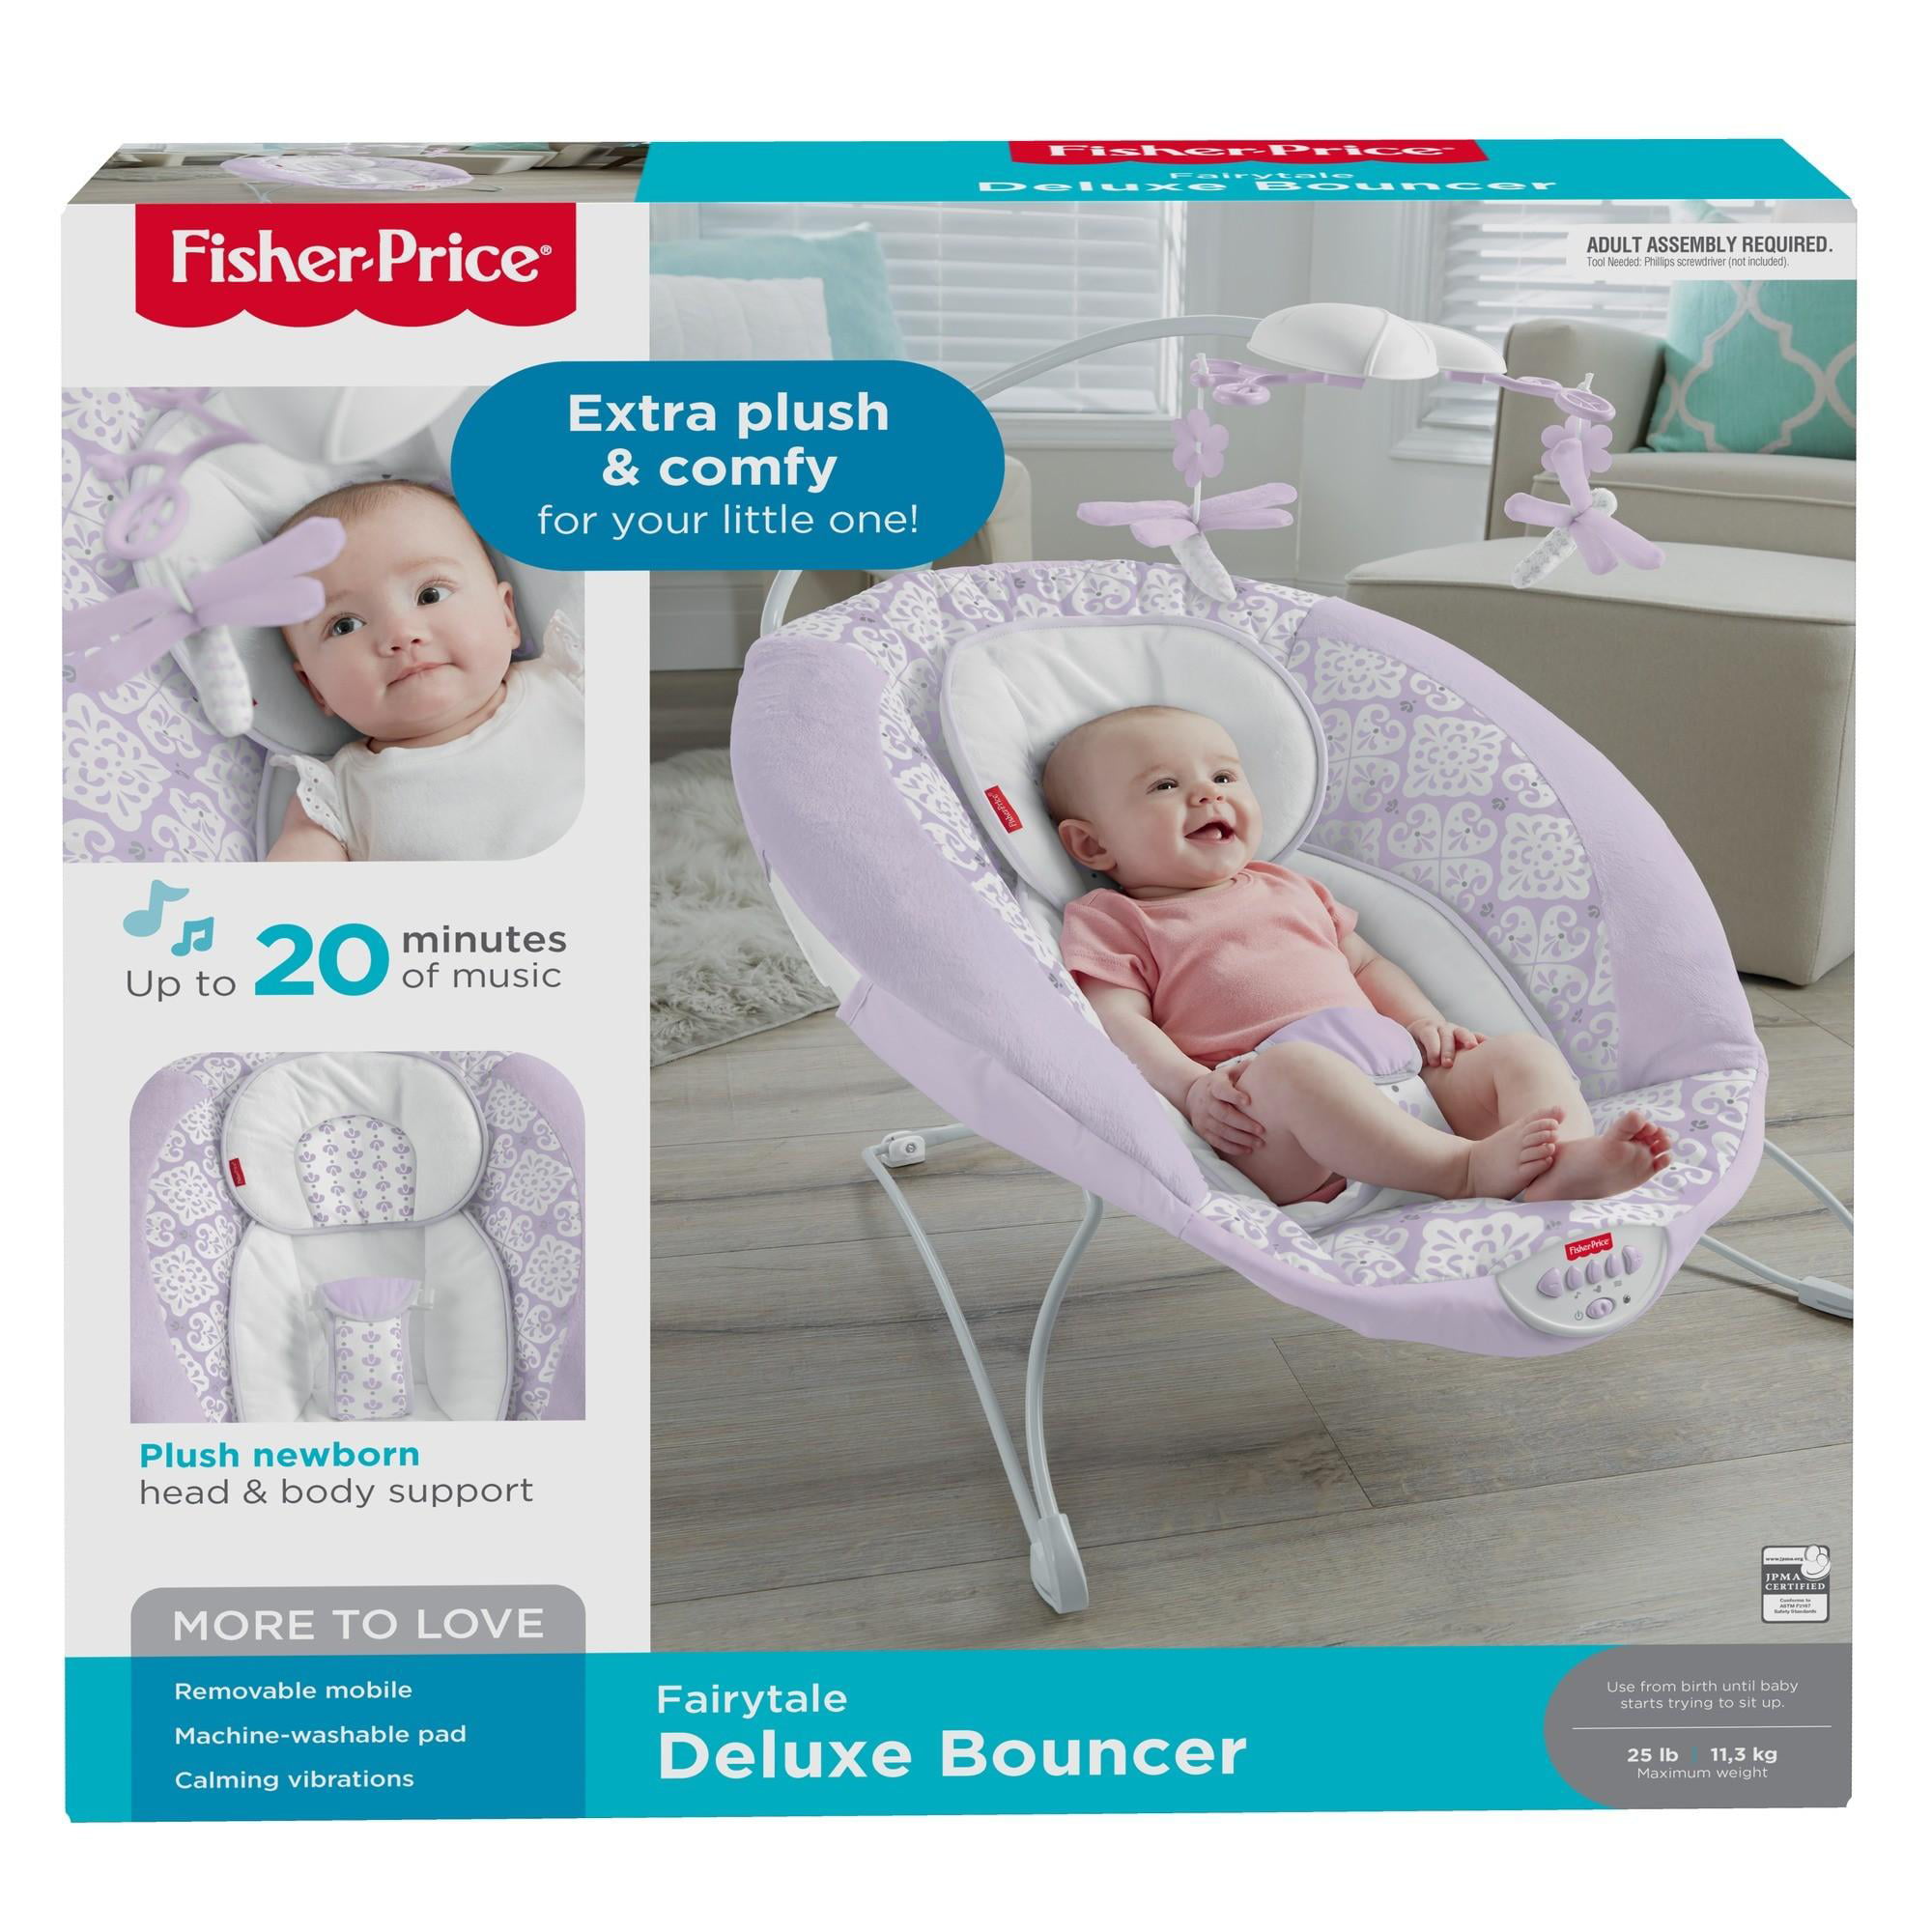 fisher price deluxe bouncer fairytale